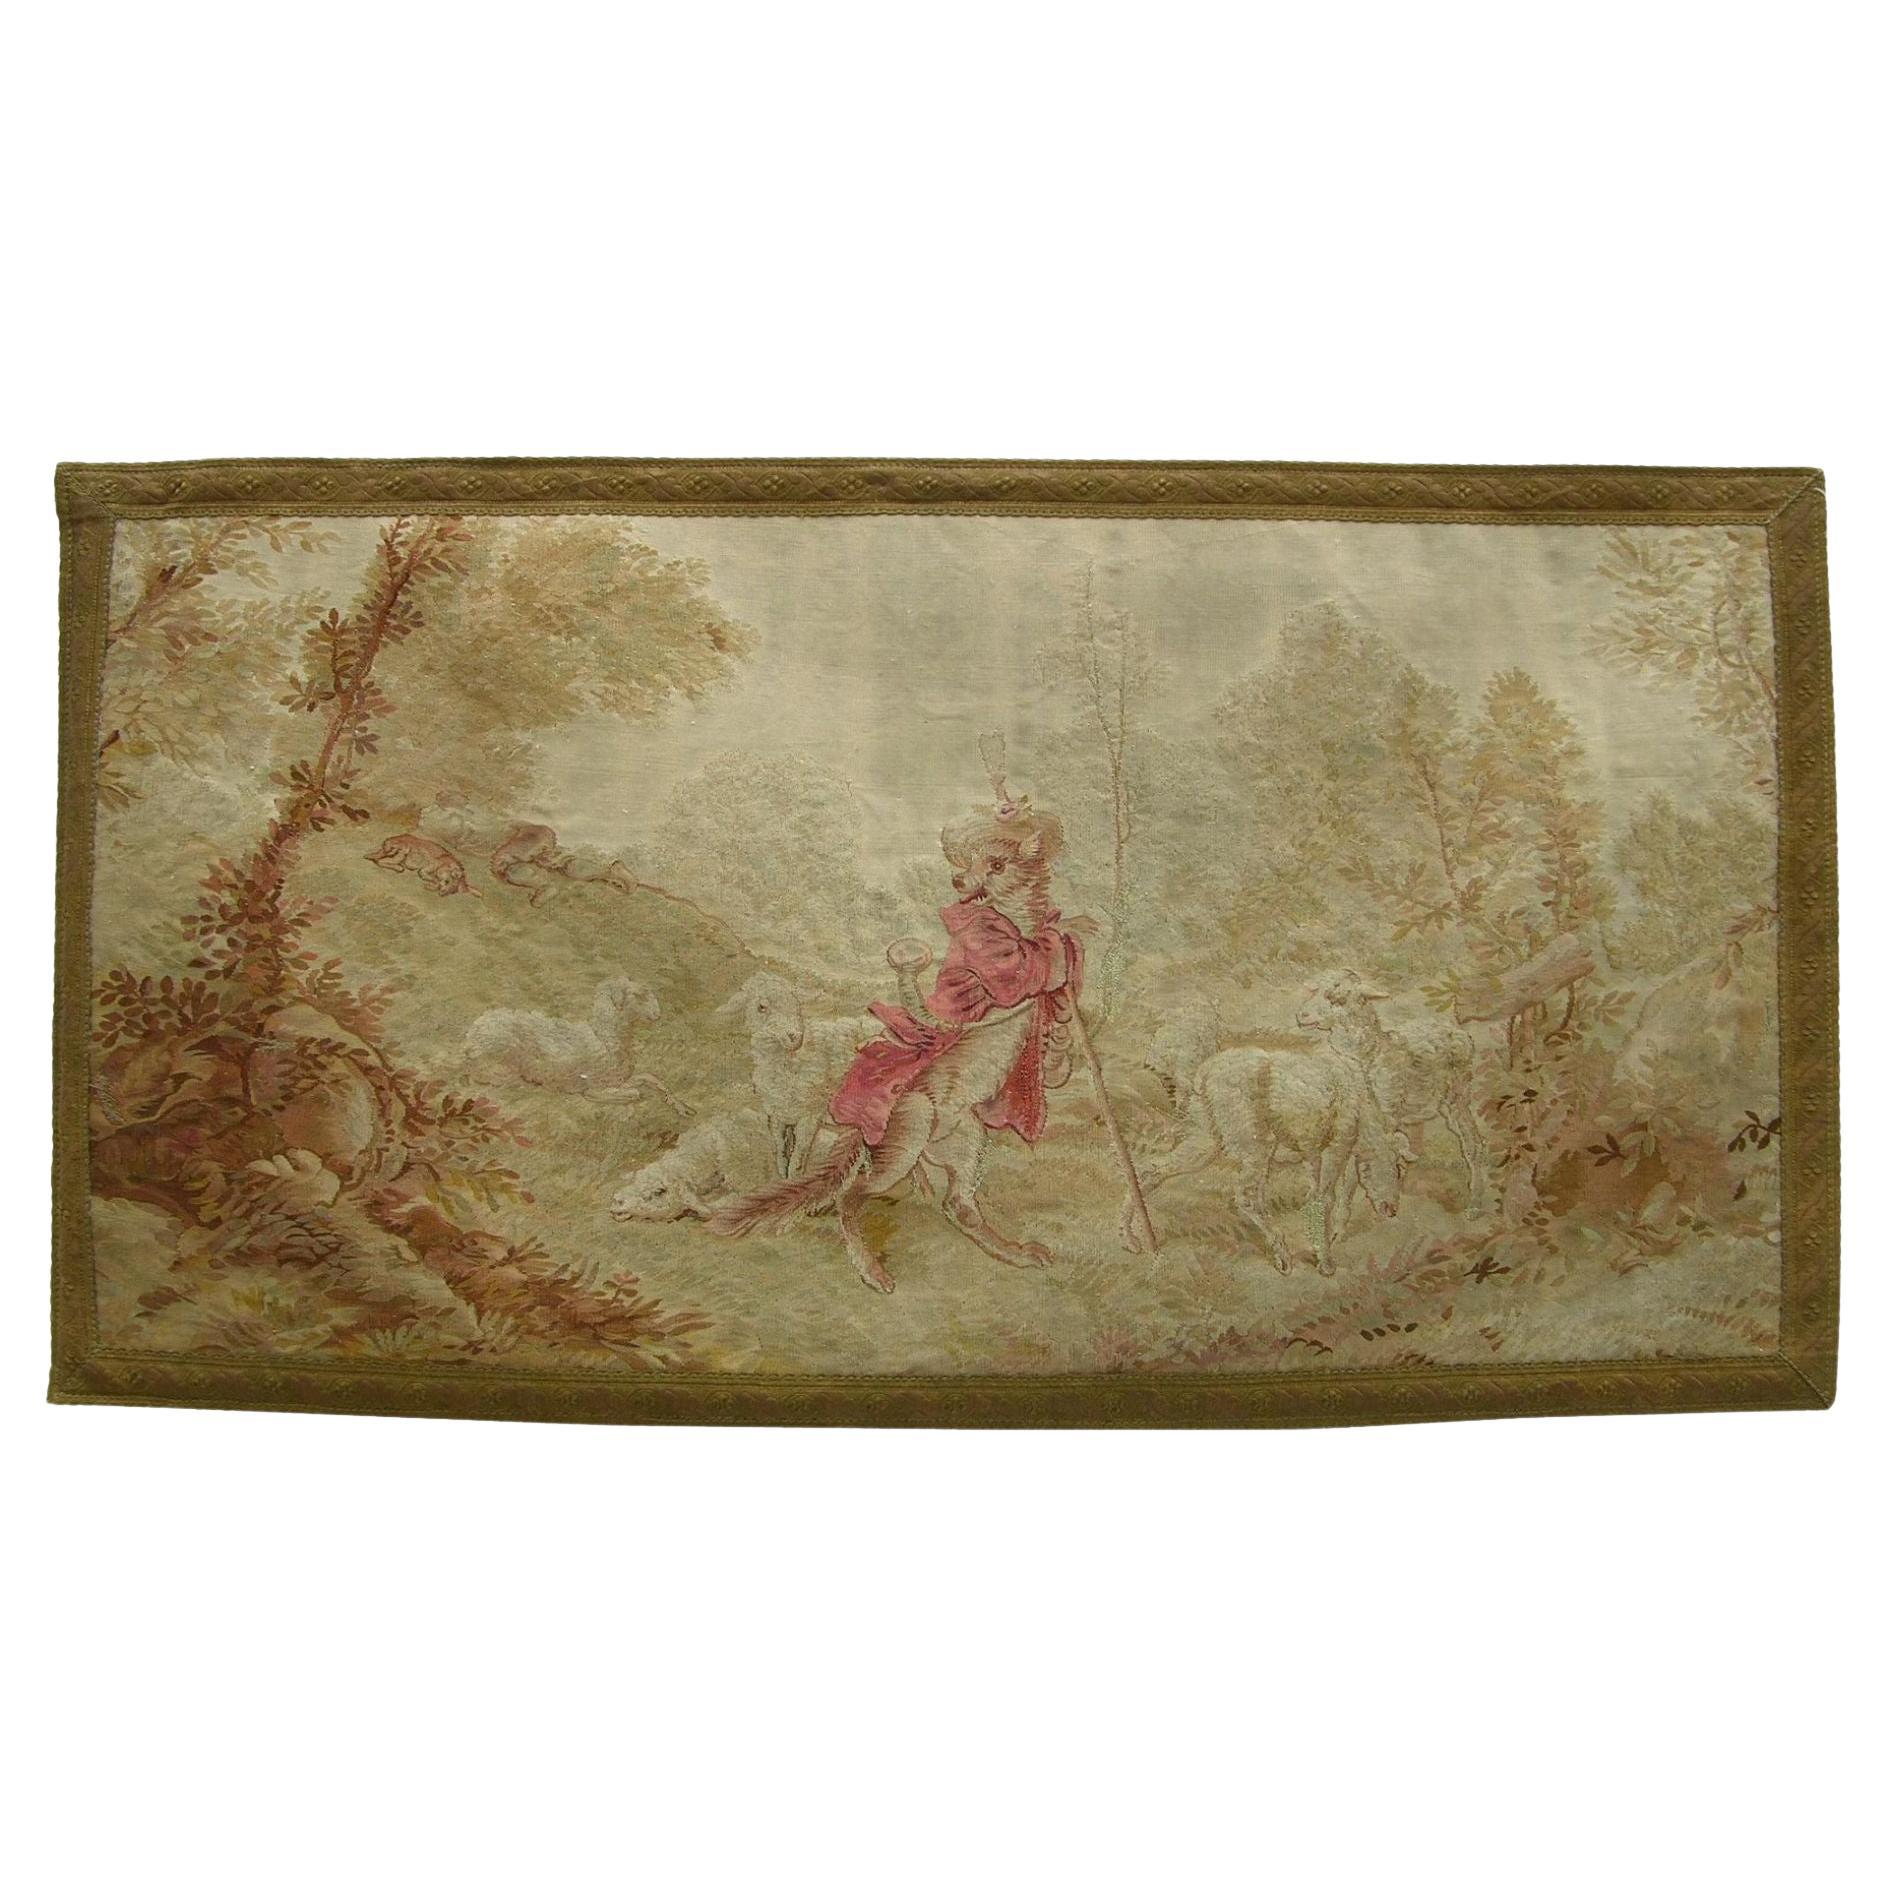 1900 Antique French Aubusson Tapestry 1'11" X 3'8"